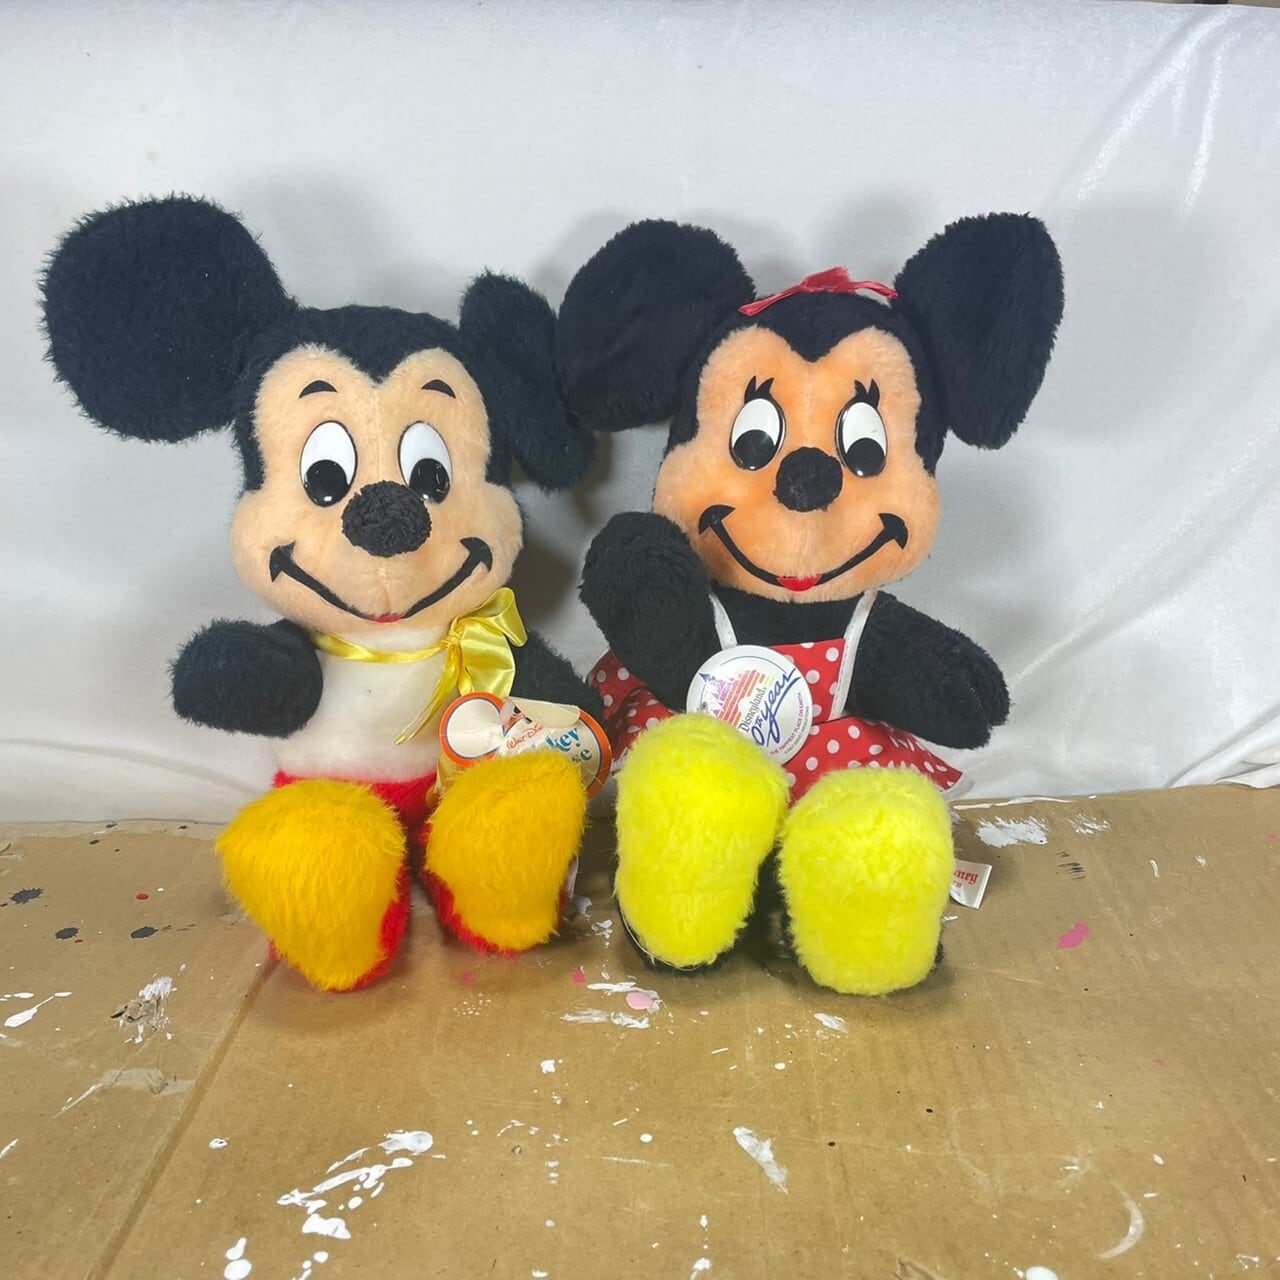 70s ミッキーマウス＆ミニーマウス　ヴィンテージプラッシュ　2匹セット / Mickey Mouse & Minnie Mouse Vintage  Plush Set of 2 | THE PUPPEZ☆e-shop　/ ザ　パペッツ松本-WEBショップ powered by BASE